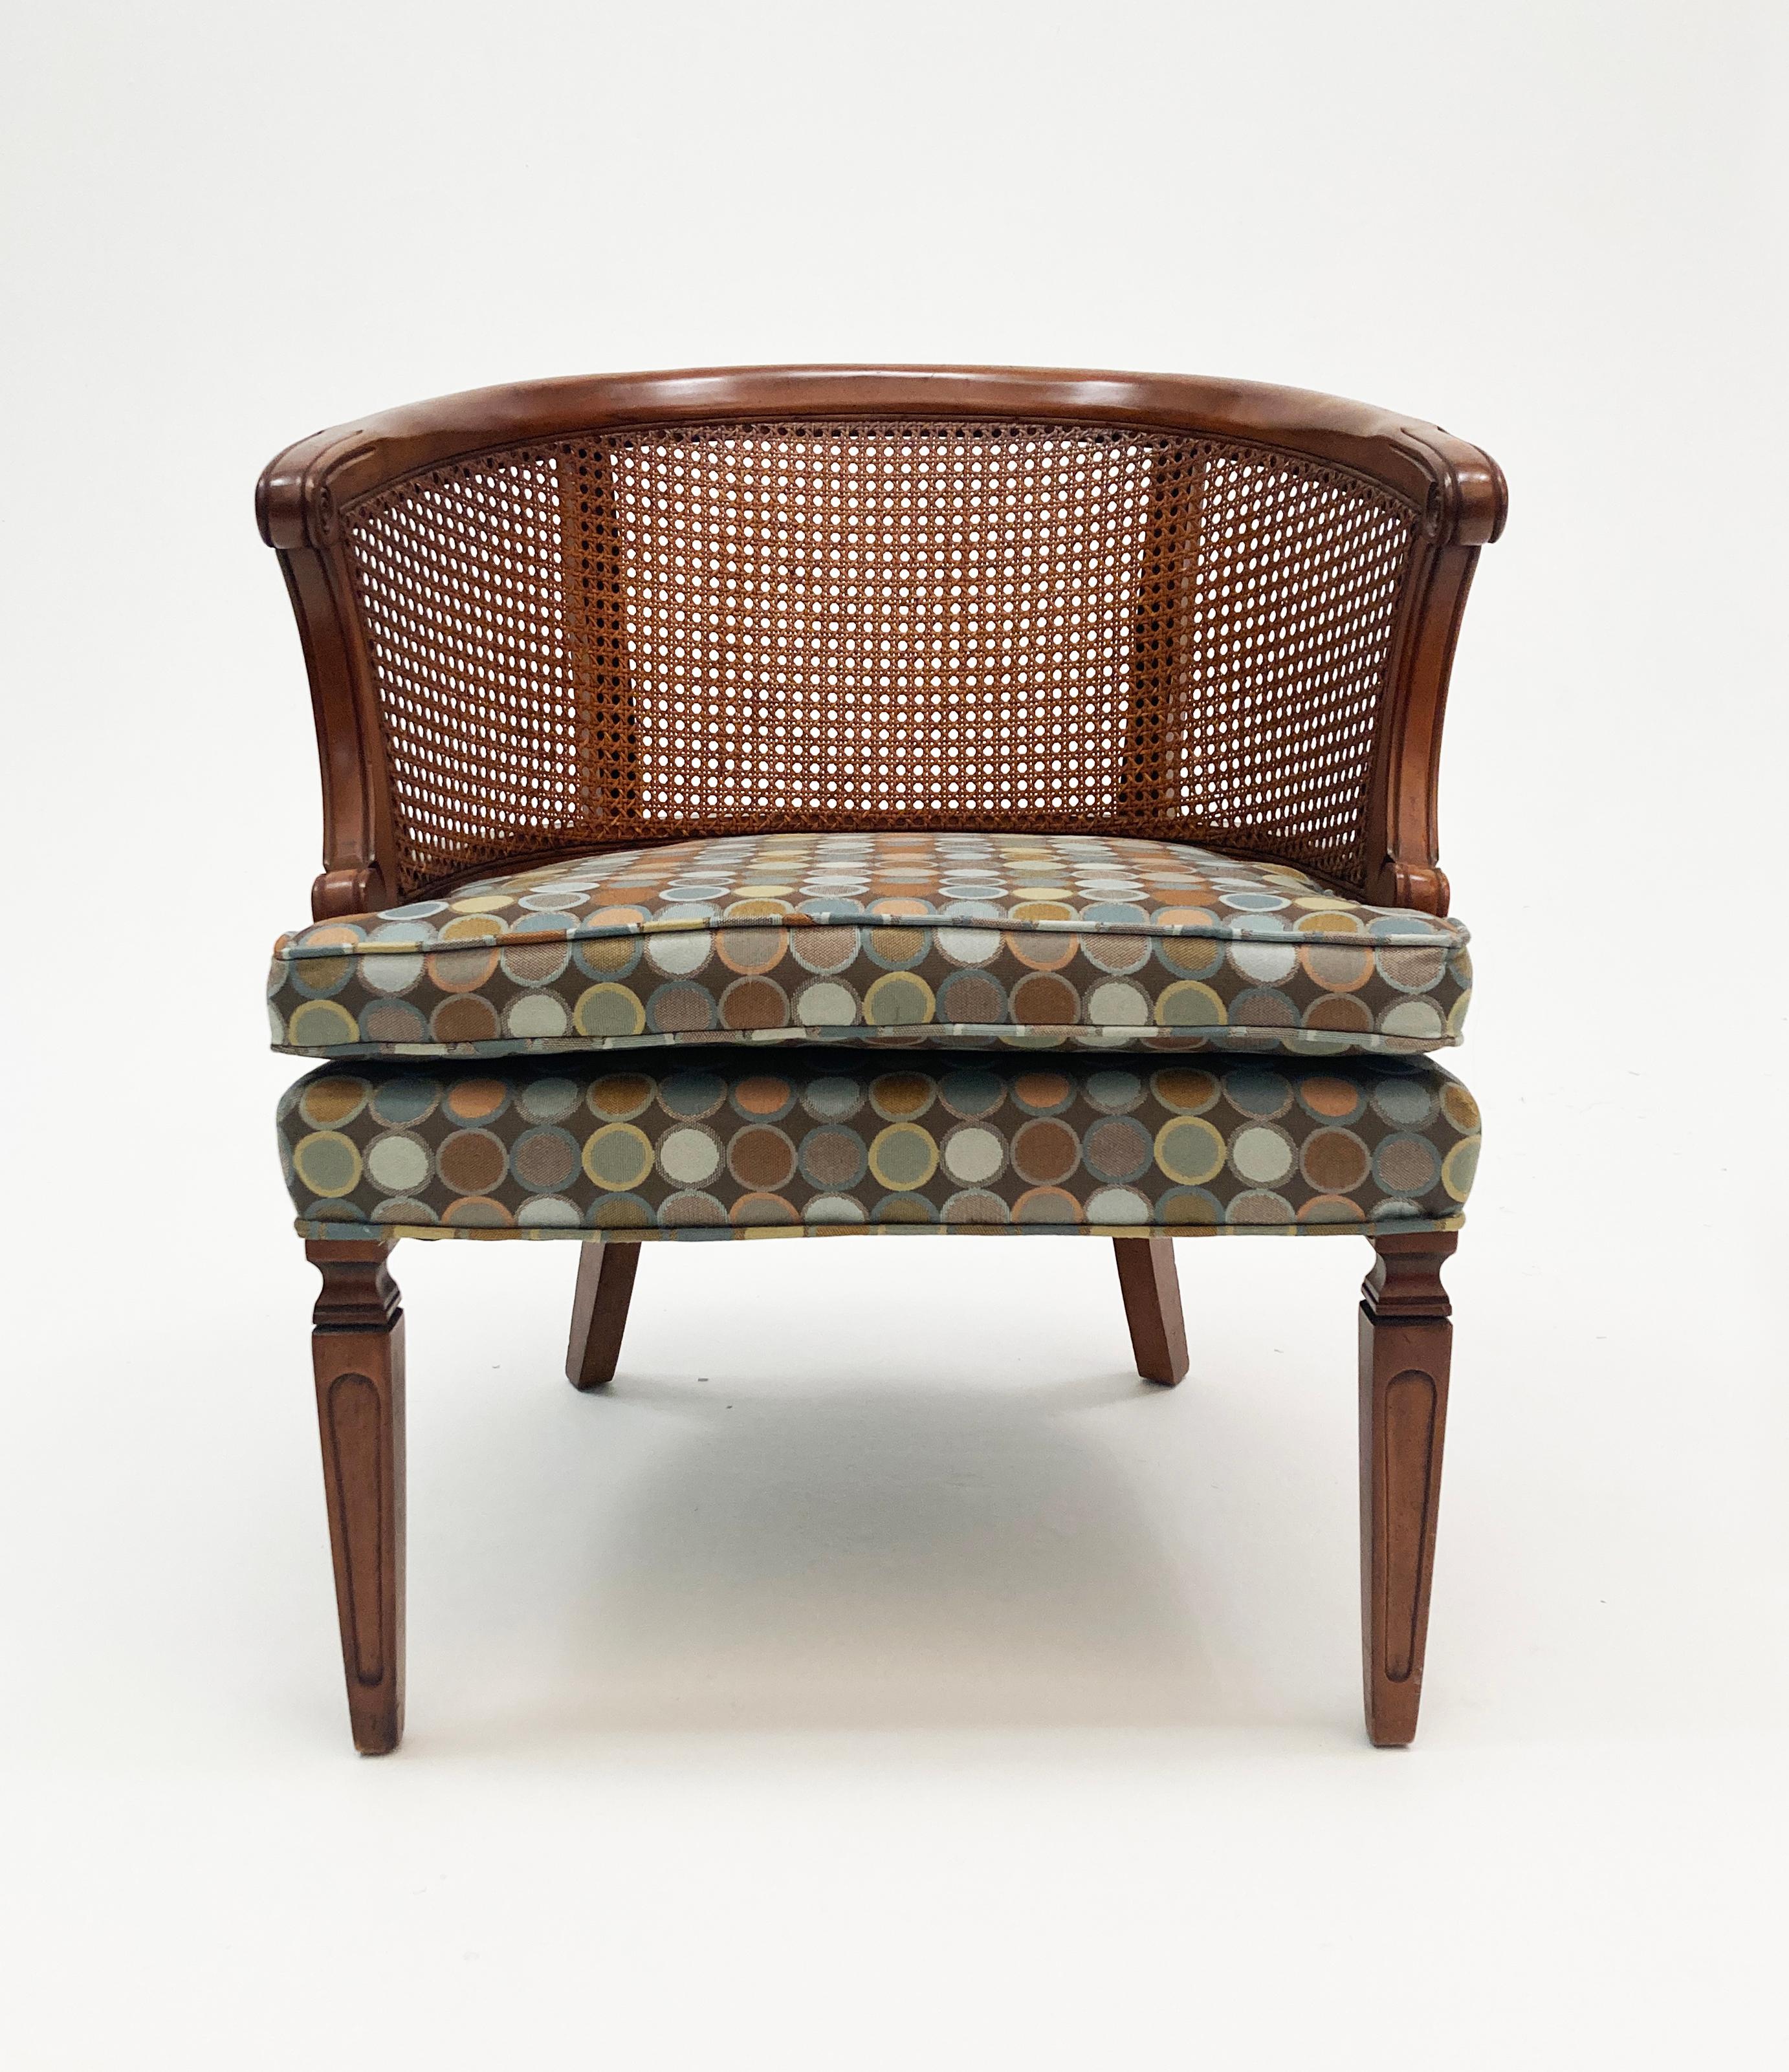 Another chapter of mid-century modern opens with this beautiful barrel back cane chair from Hickory Chair Company. Newly reupholstered in contemporary MCM dot patterned fabric in a beautiful color palette, this chair is not only comfortable, but